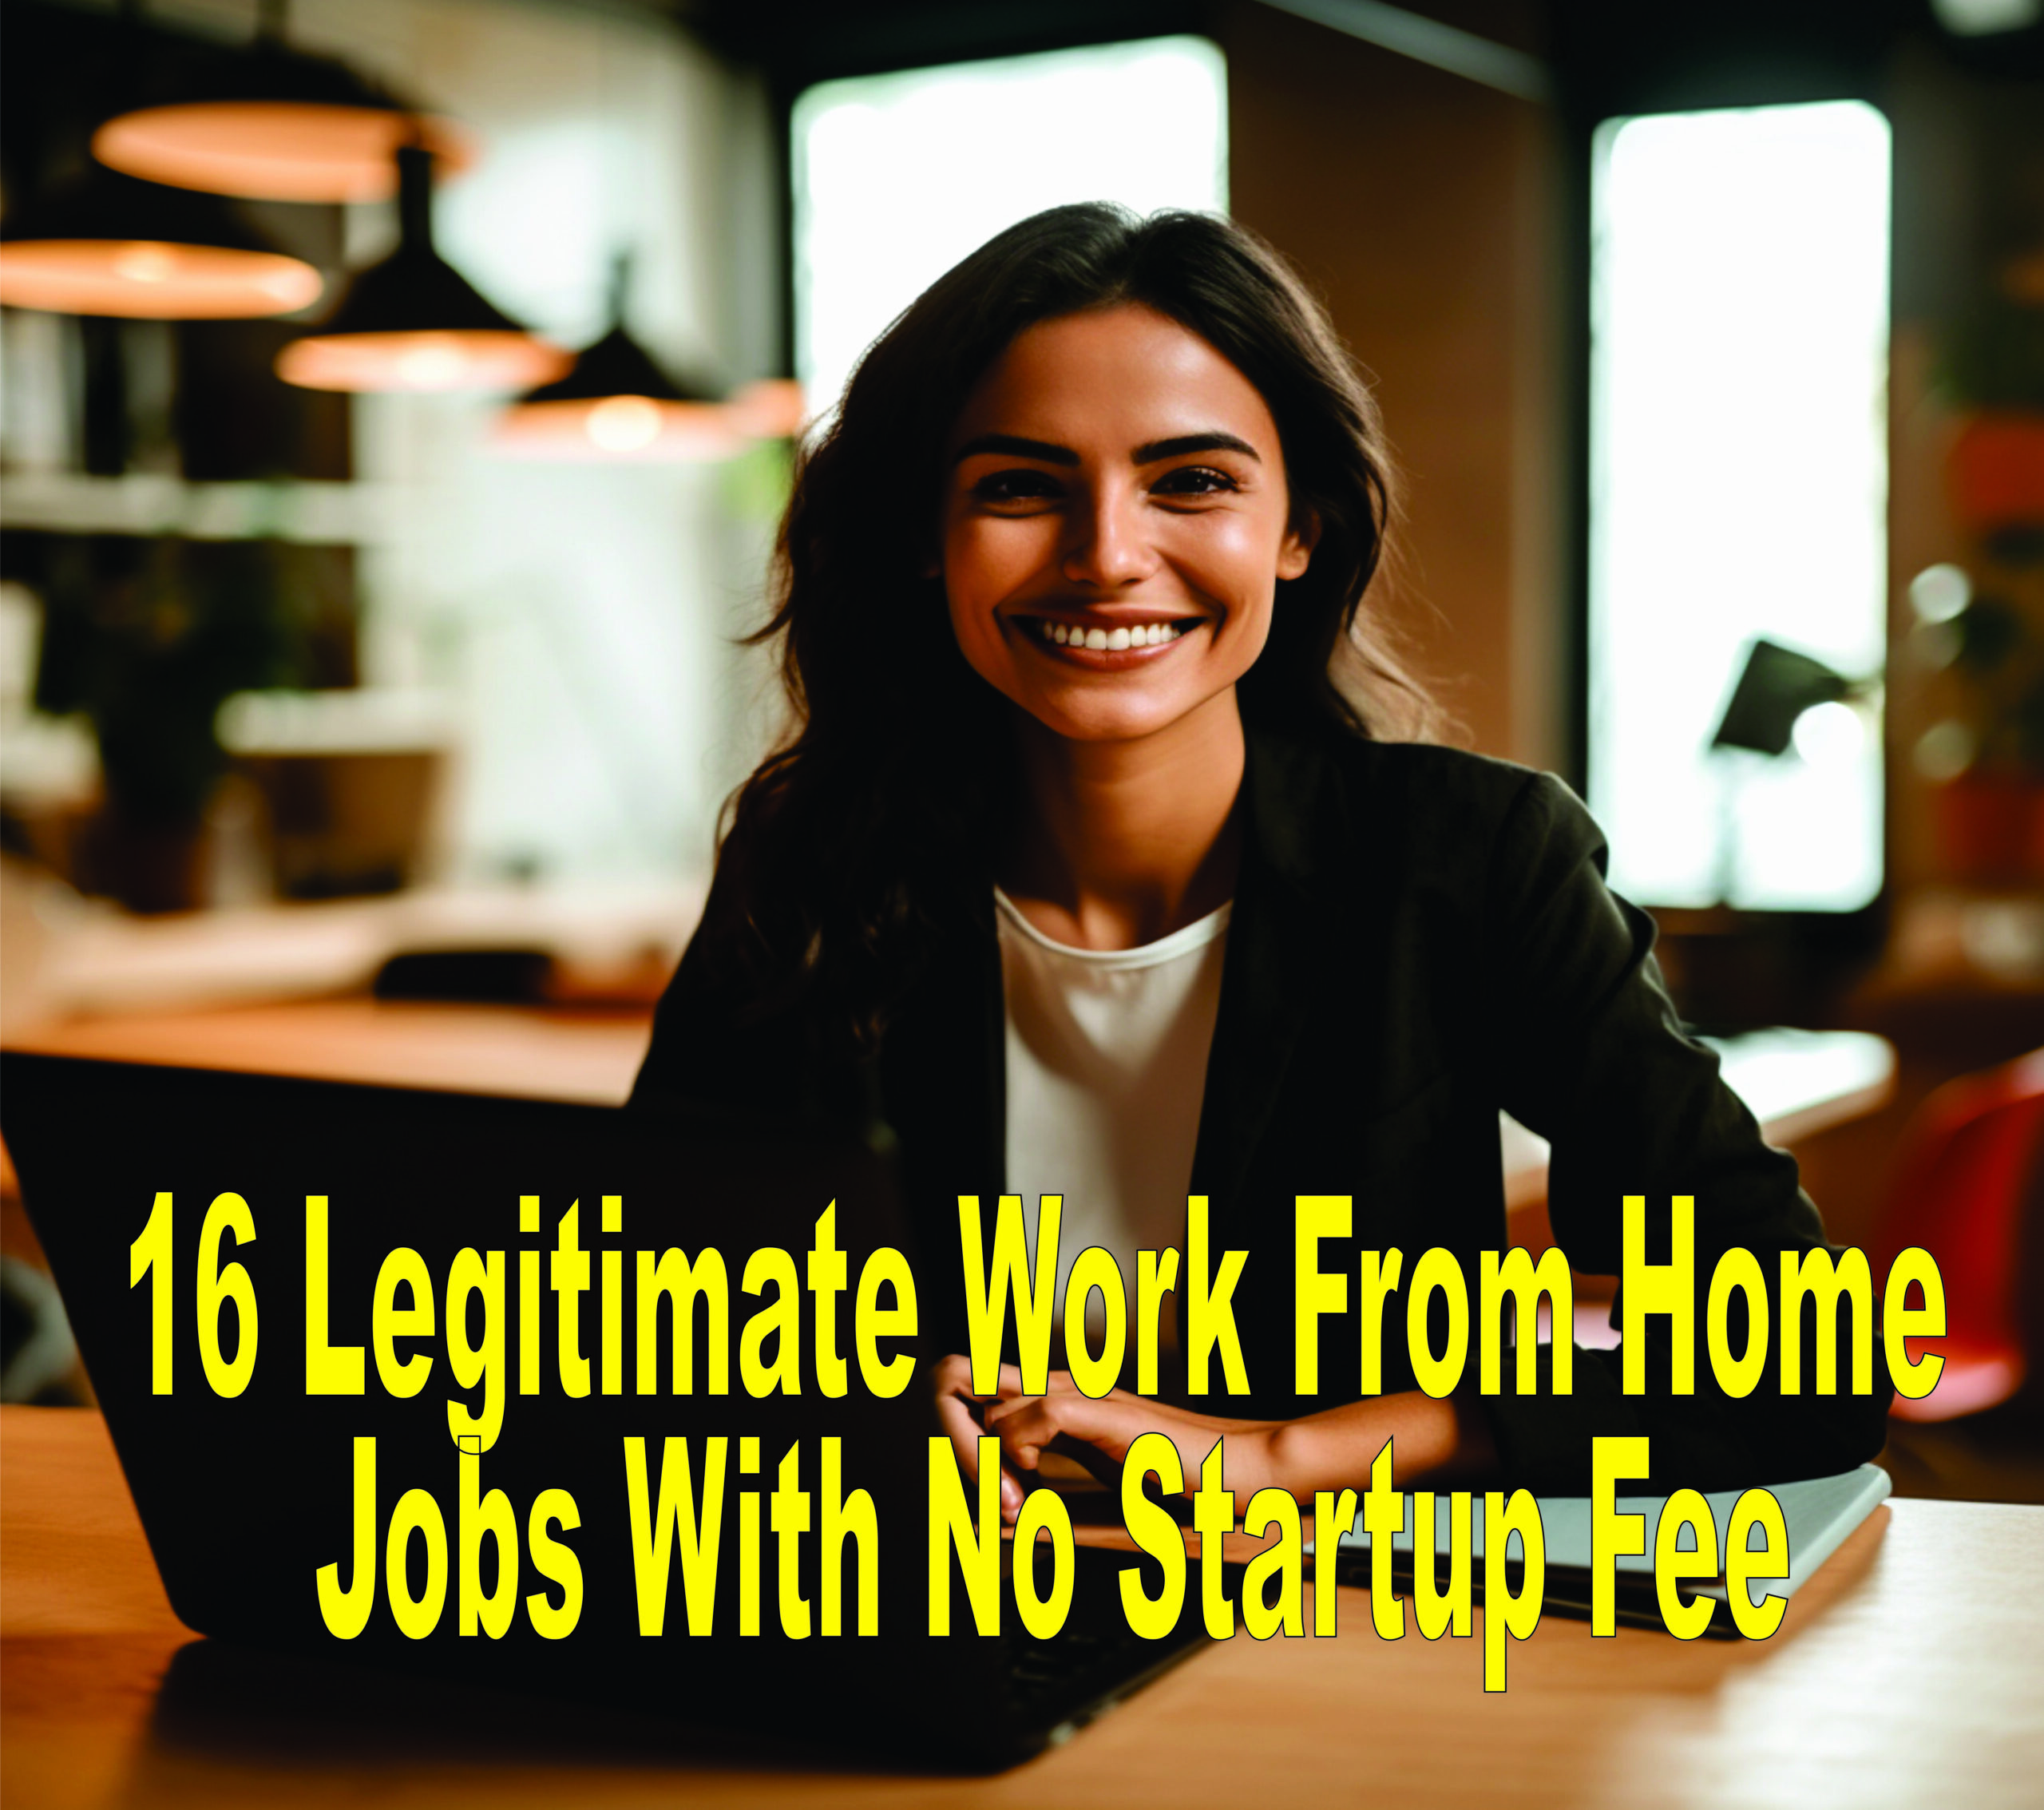 16 Legitimate Work From Home Jobs With No Startup Fee